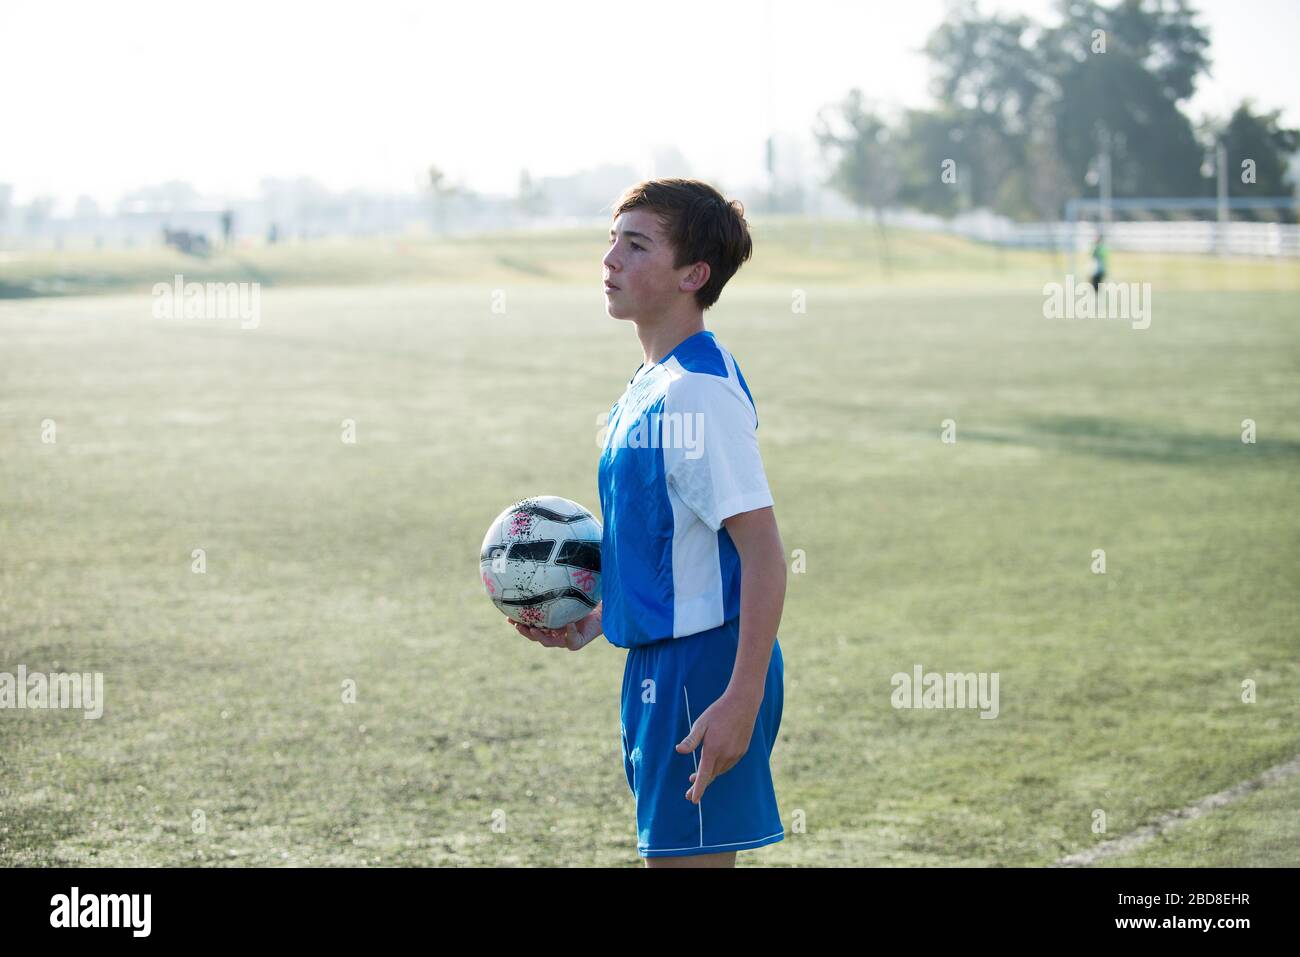 Teen soccer player holding ball and ready for a throw in Stock Photo